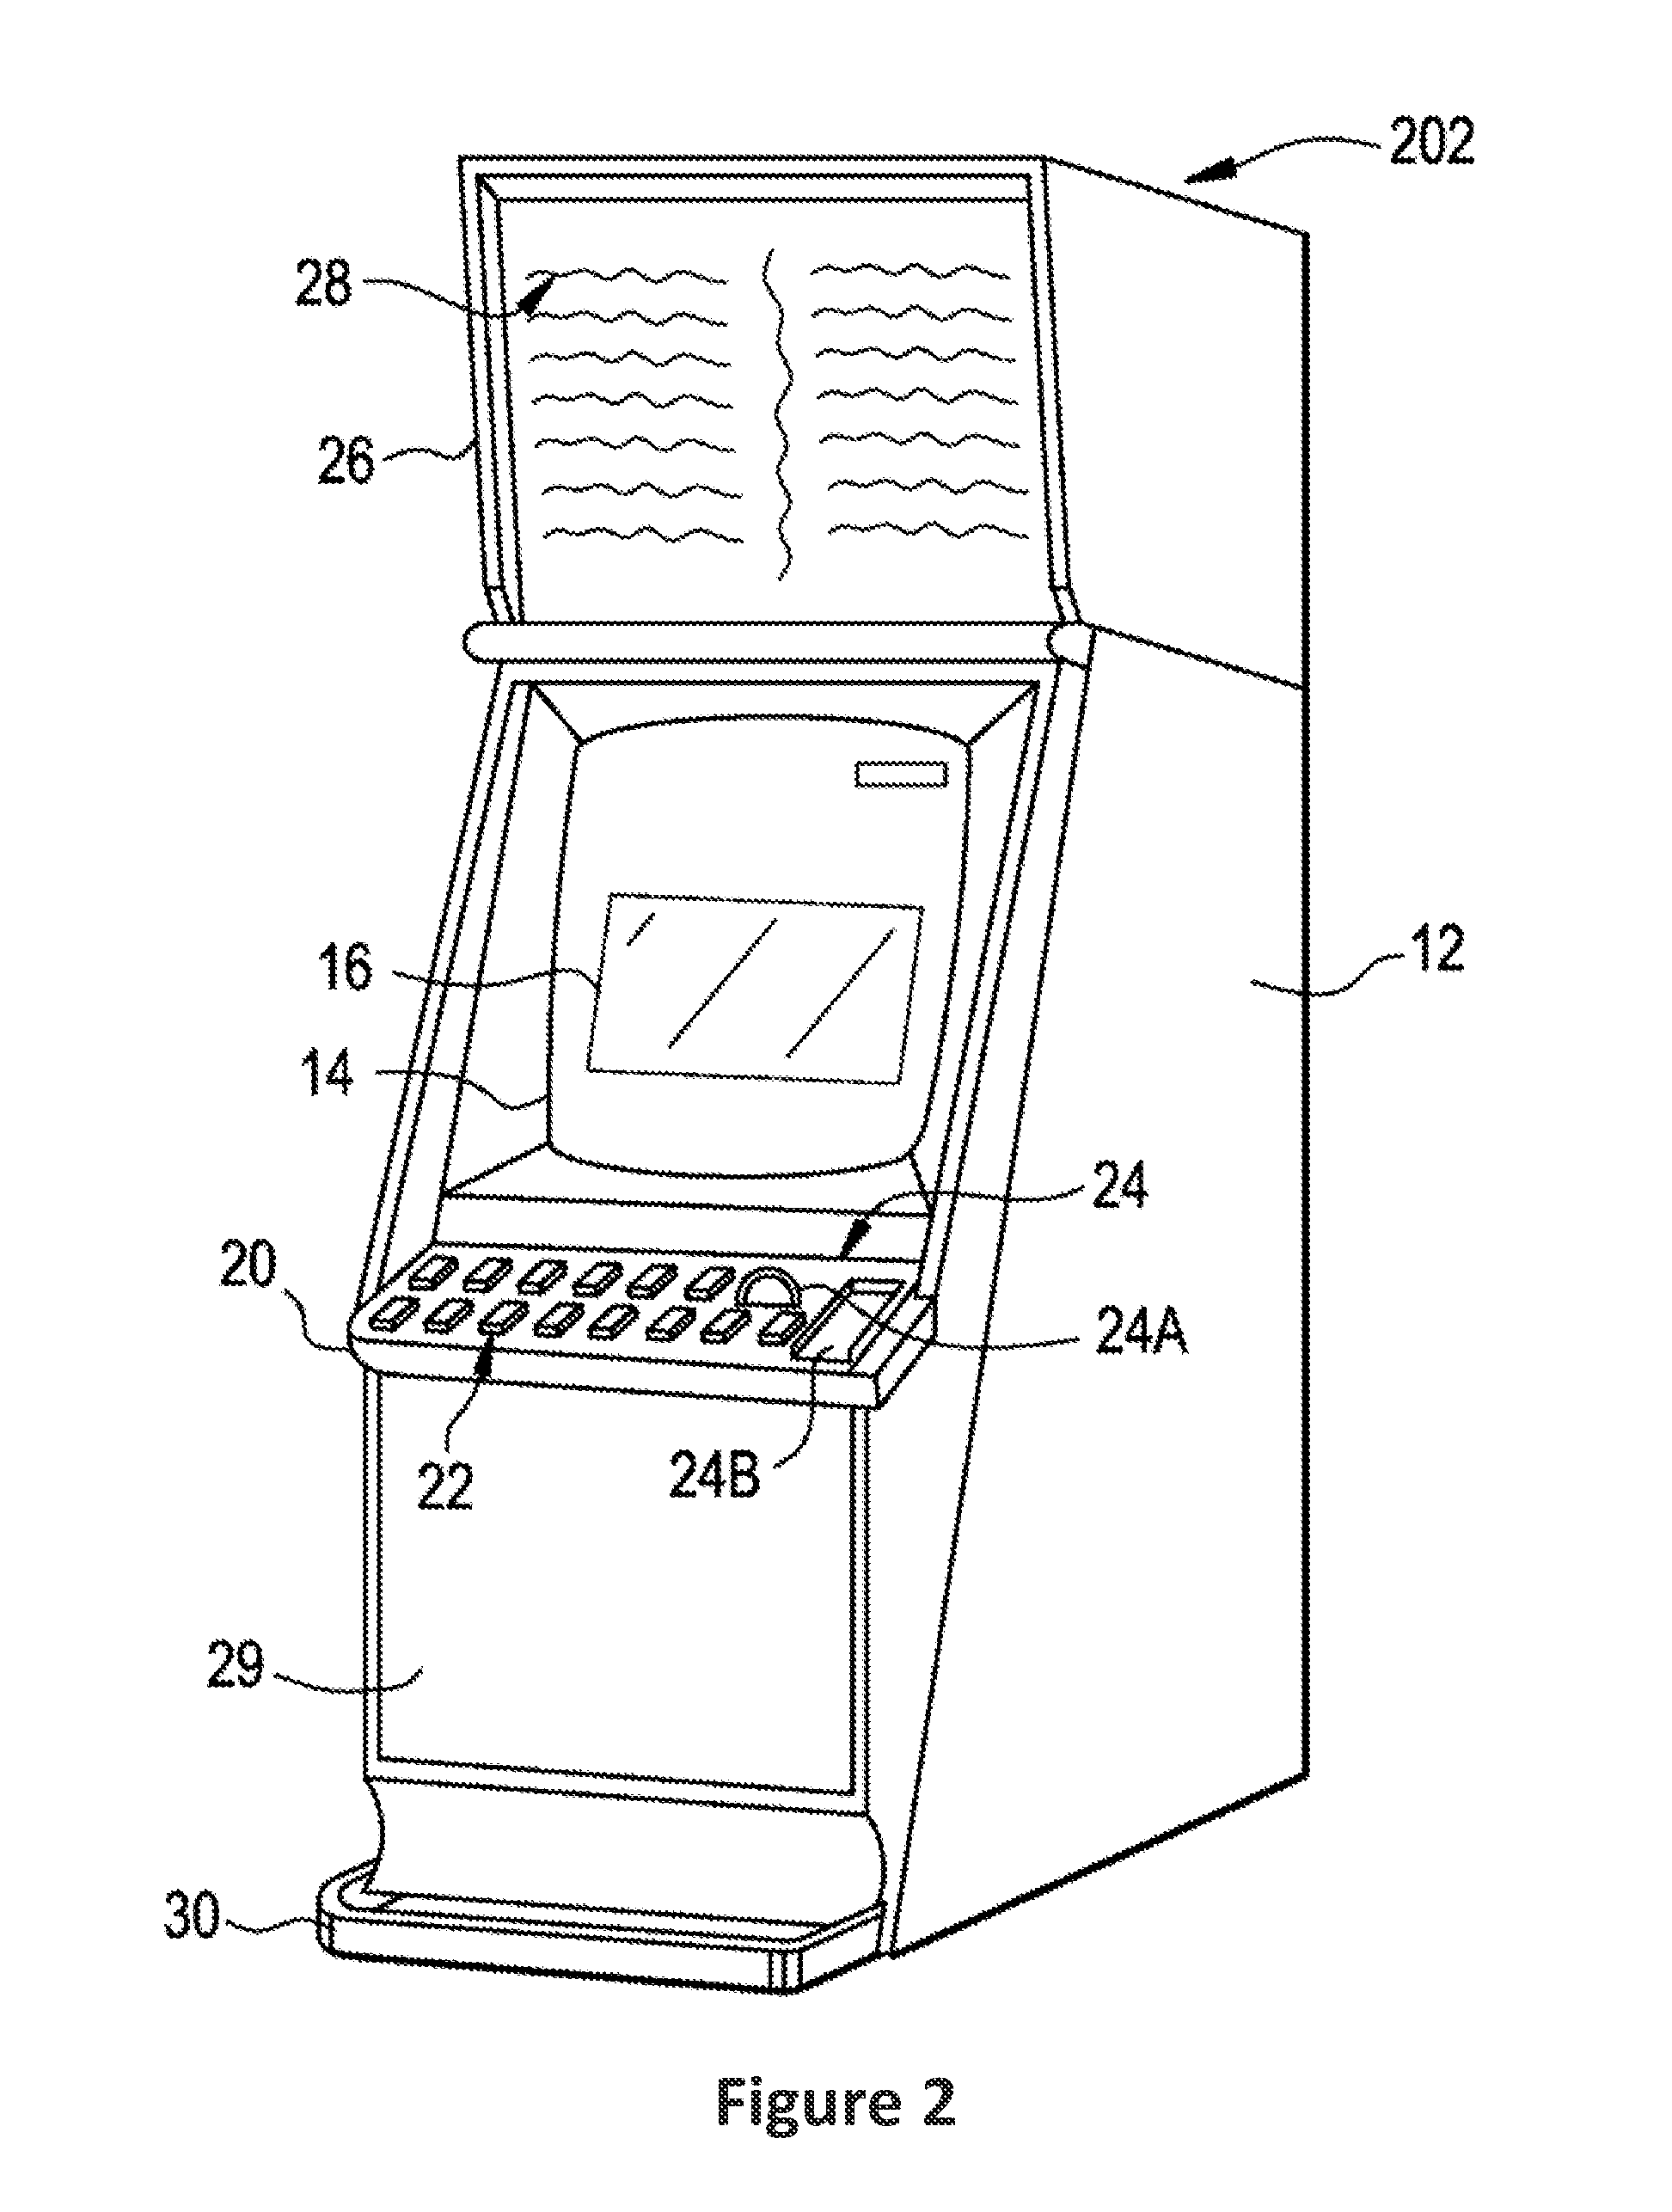 Method and apparatus for redeeming a prize